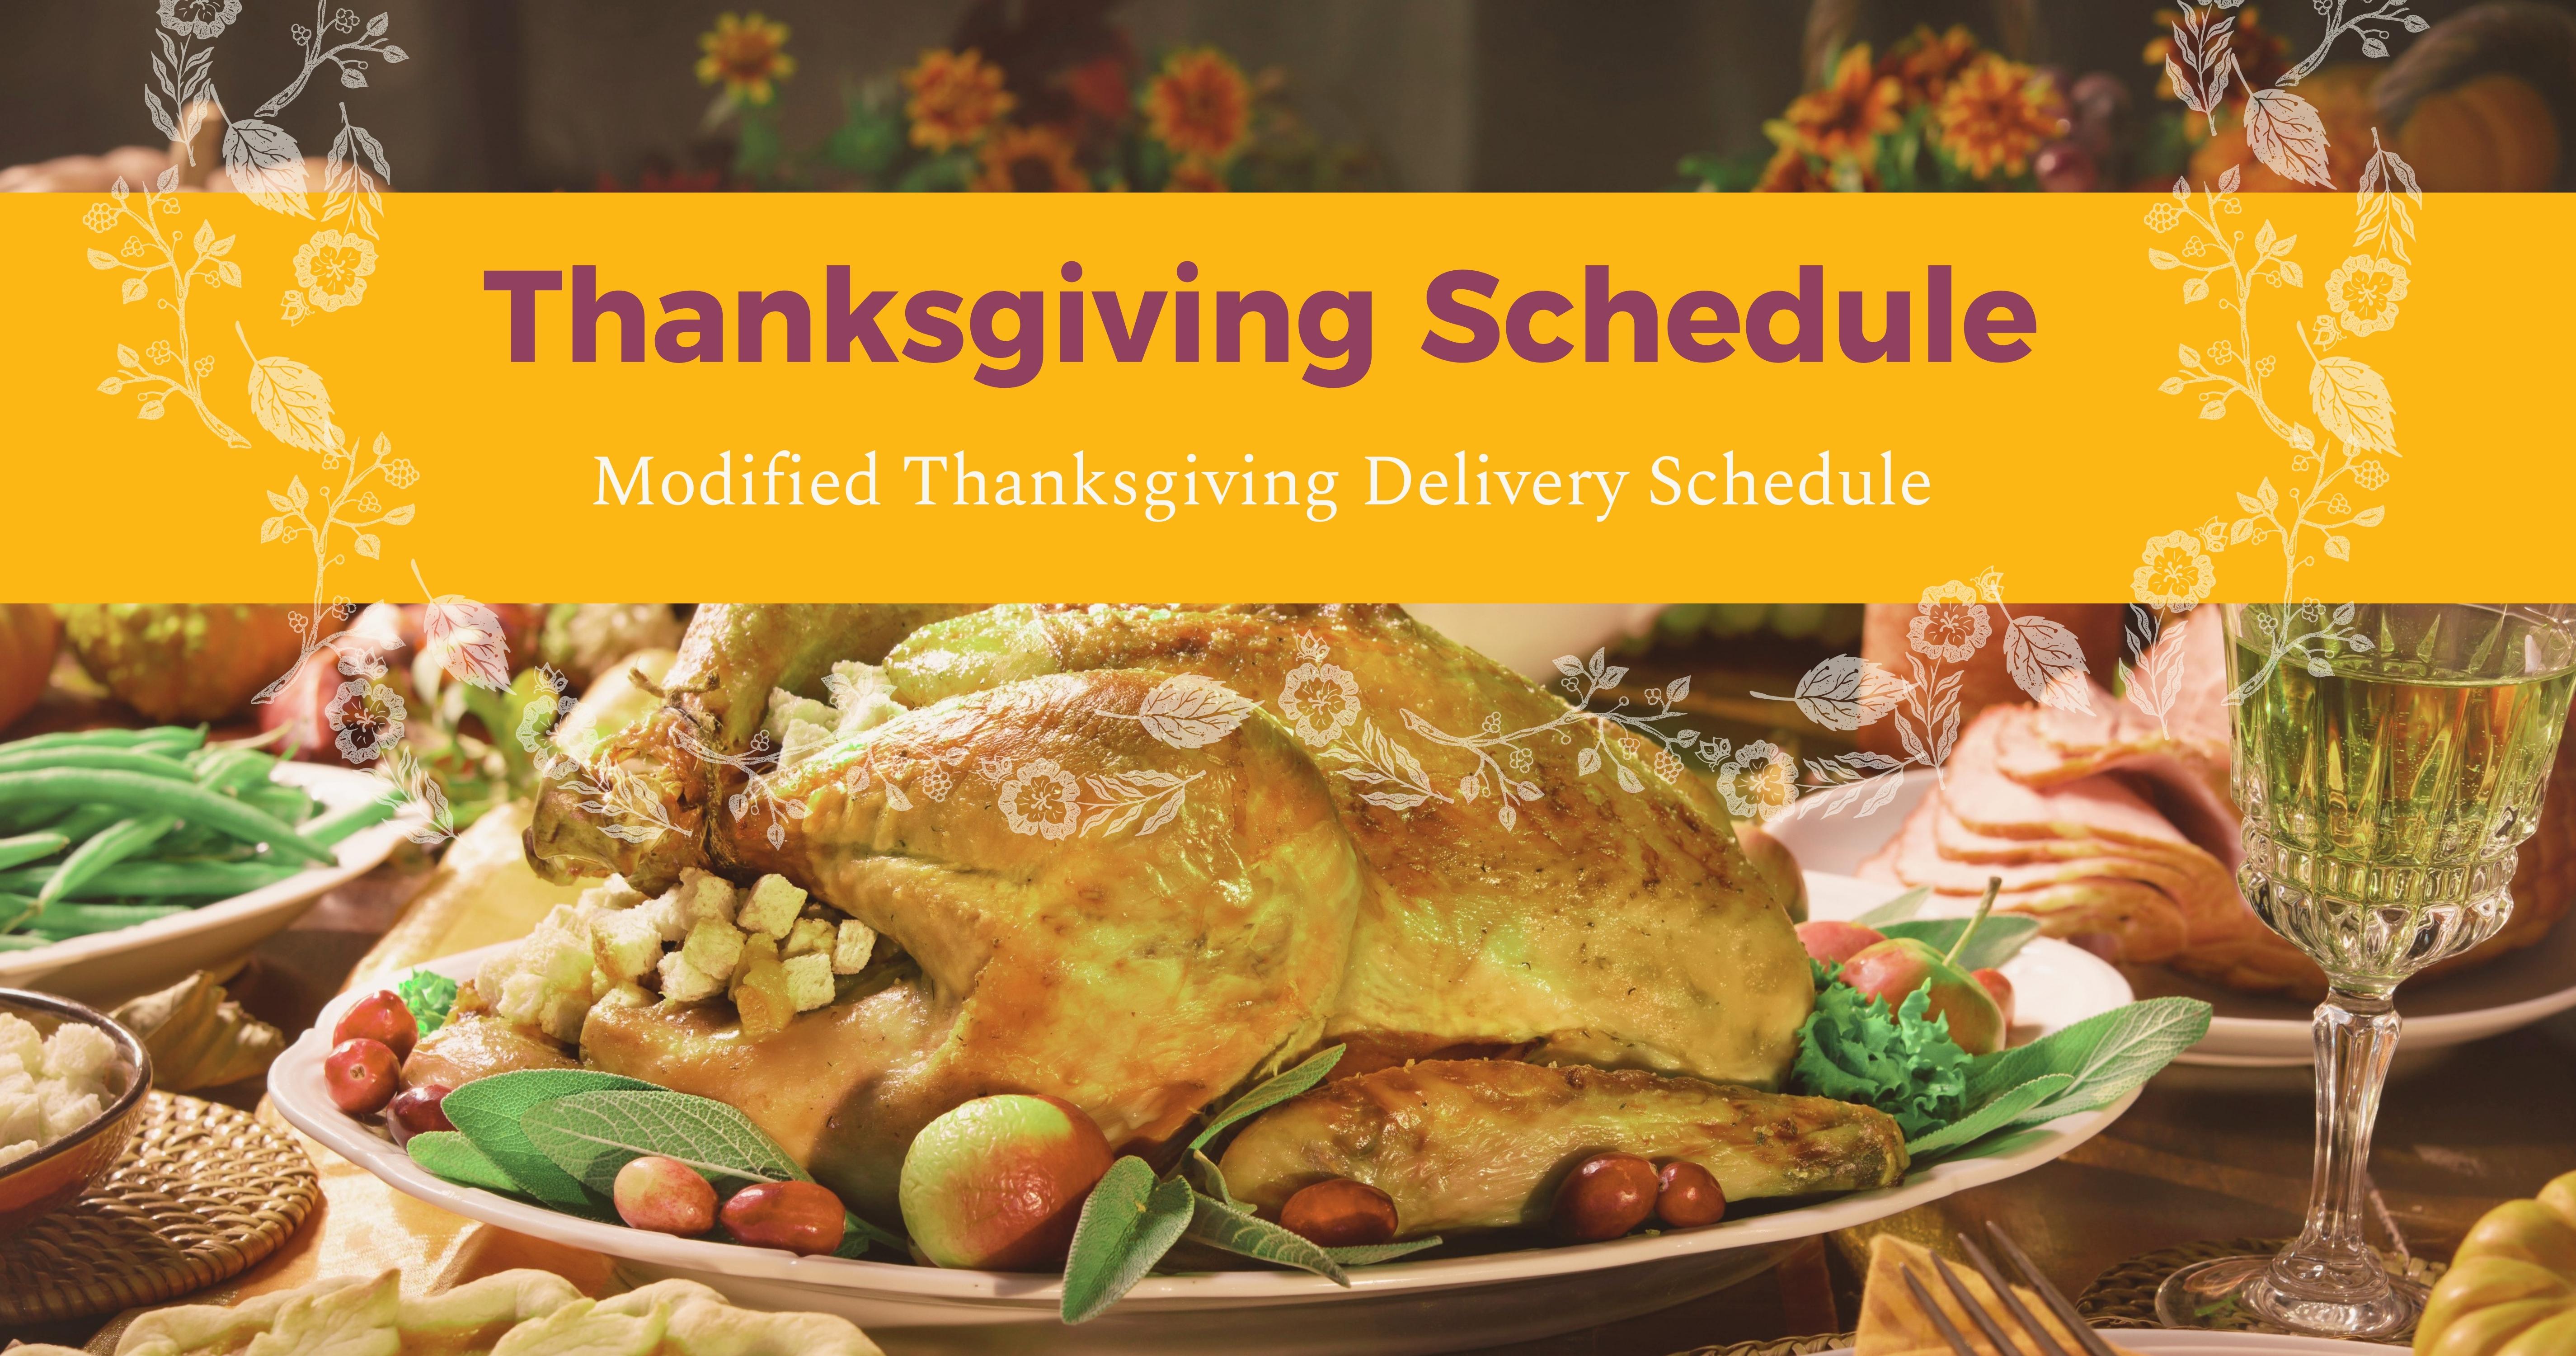 Modified Thanksgiving Delivery Schedule image